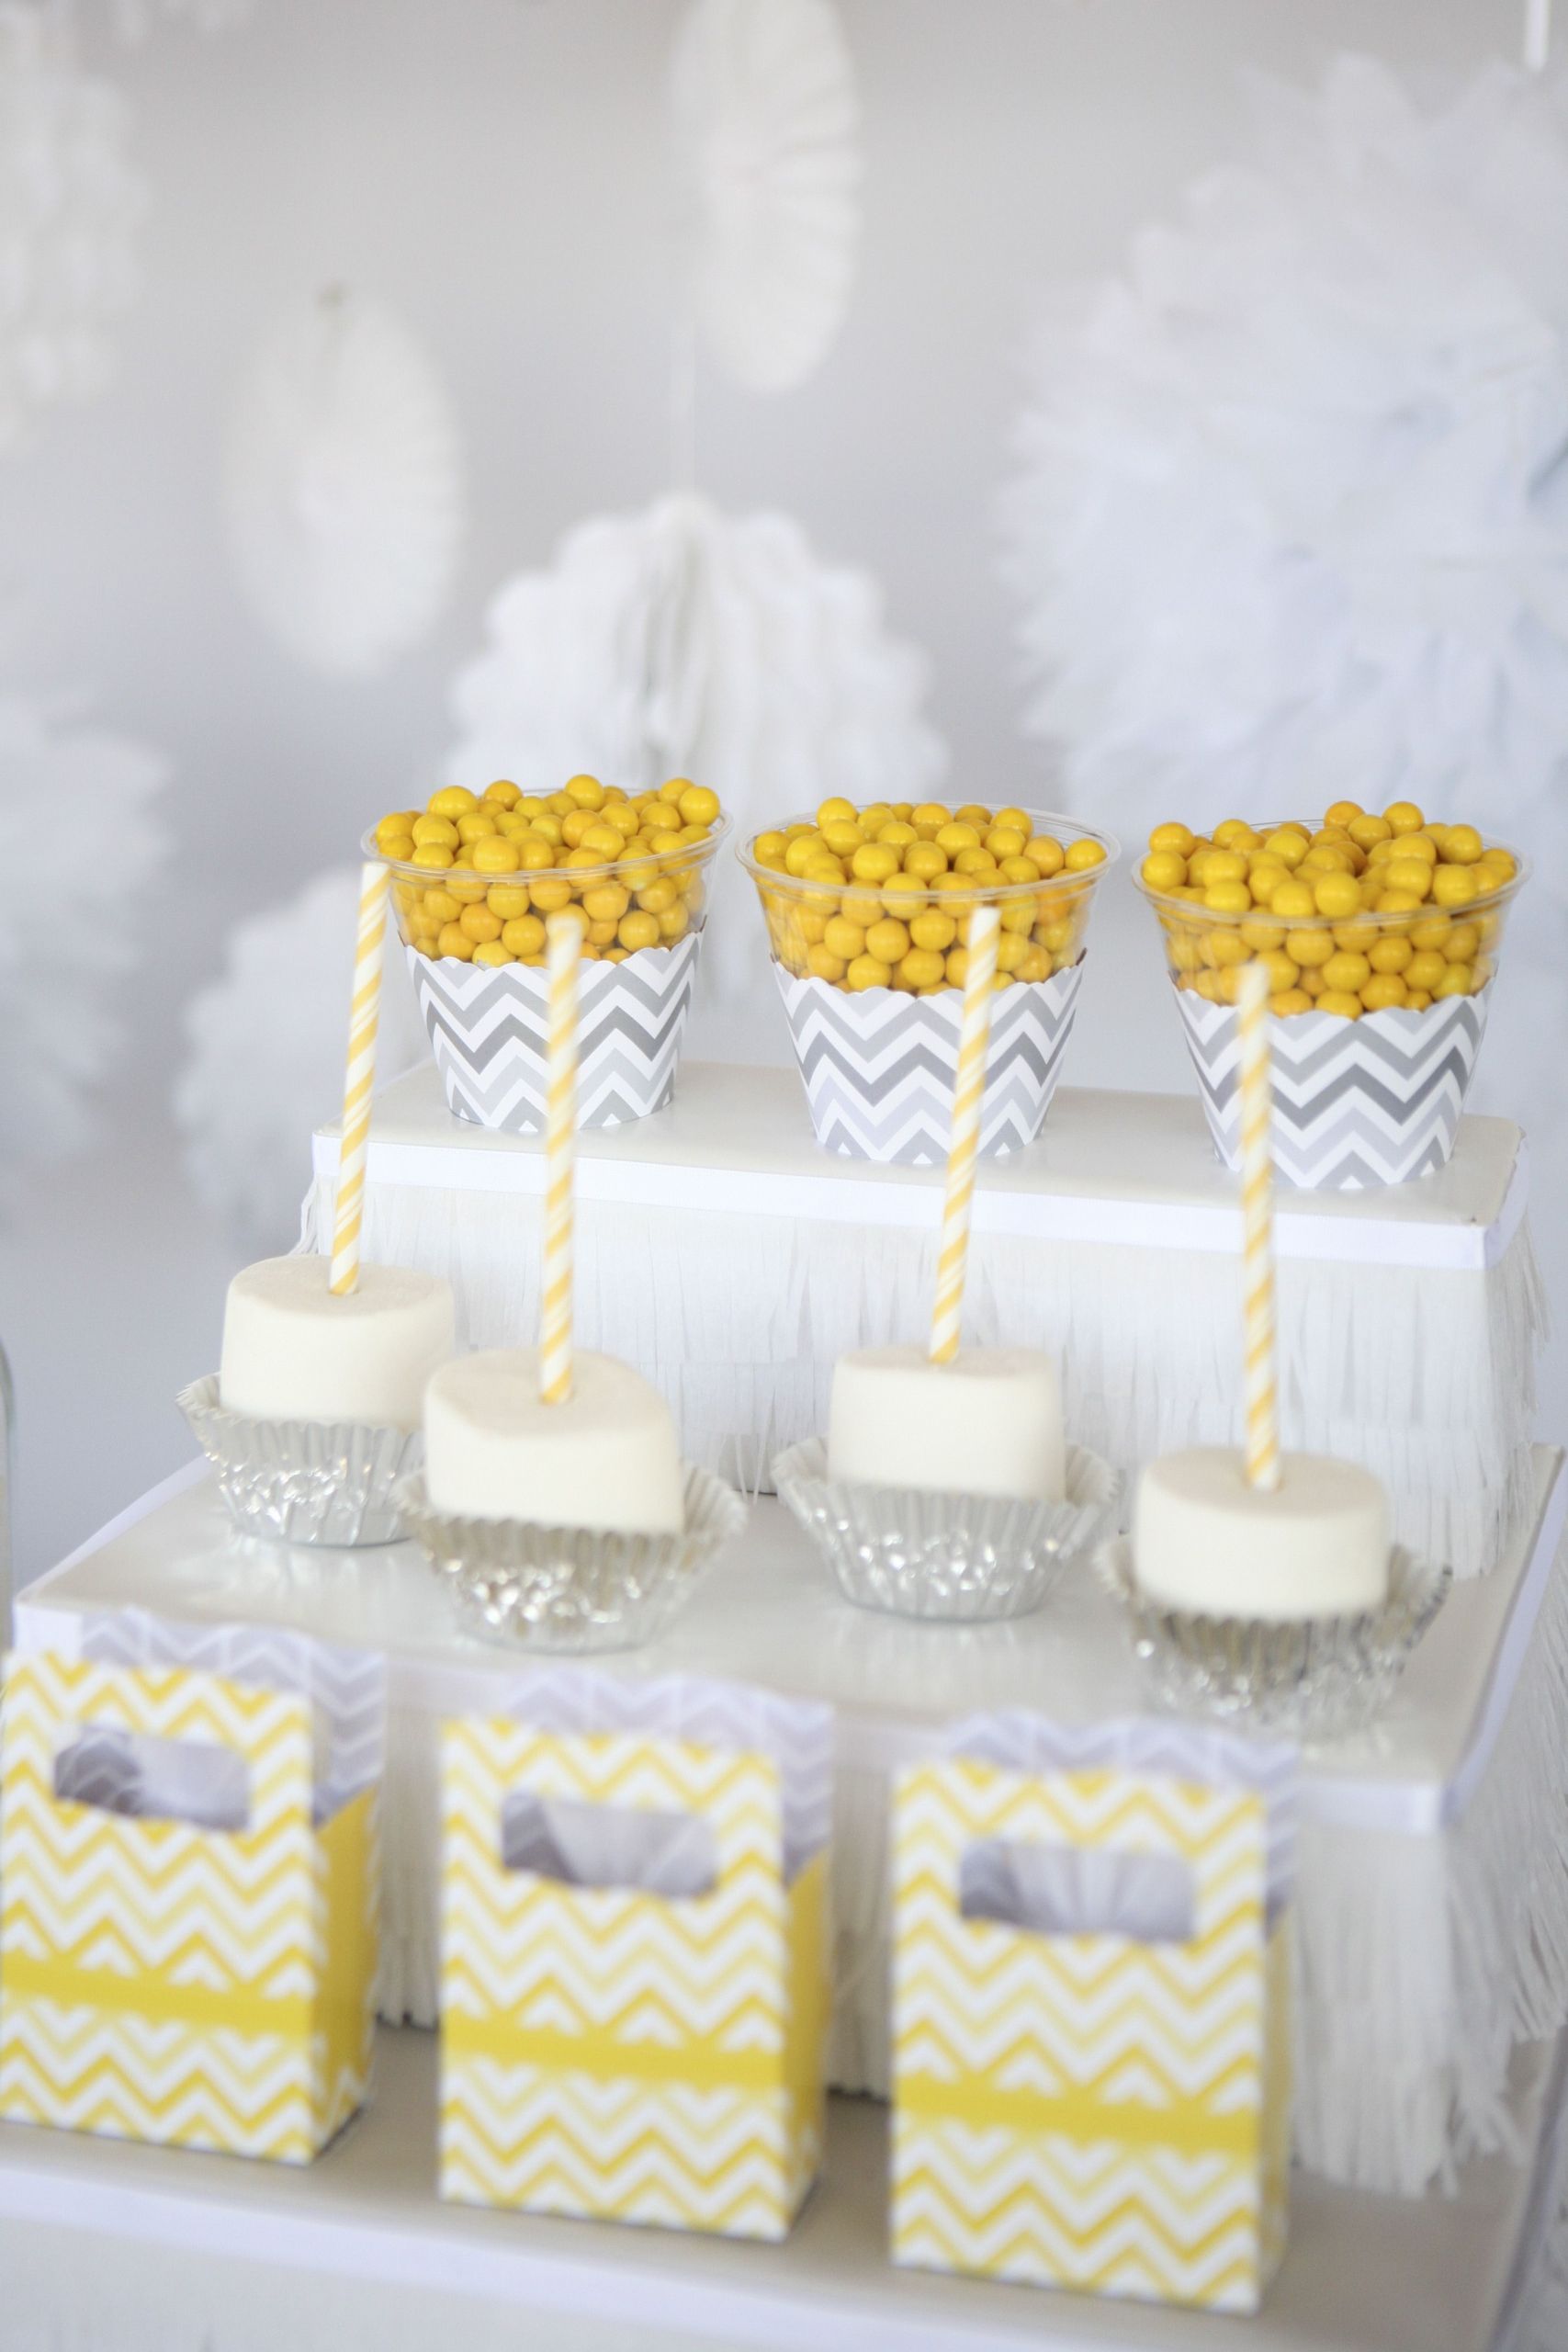 Mixed Gender Birthday Party Ideas
 Mix and Match Colors Yellow and Gray Chevron Party